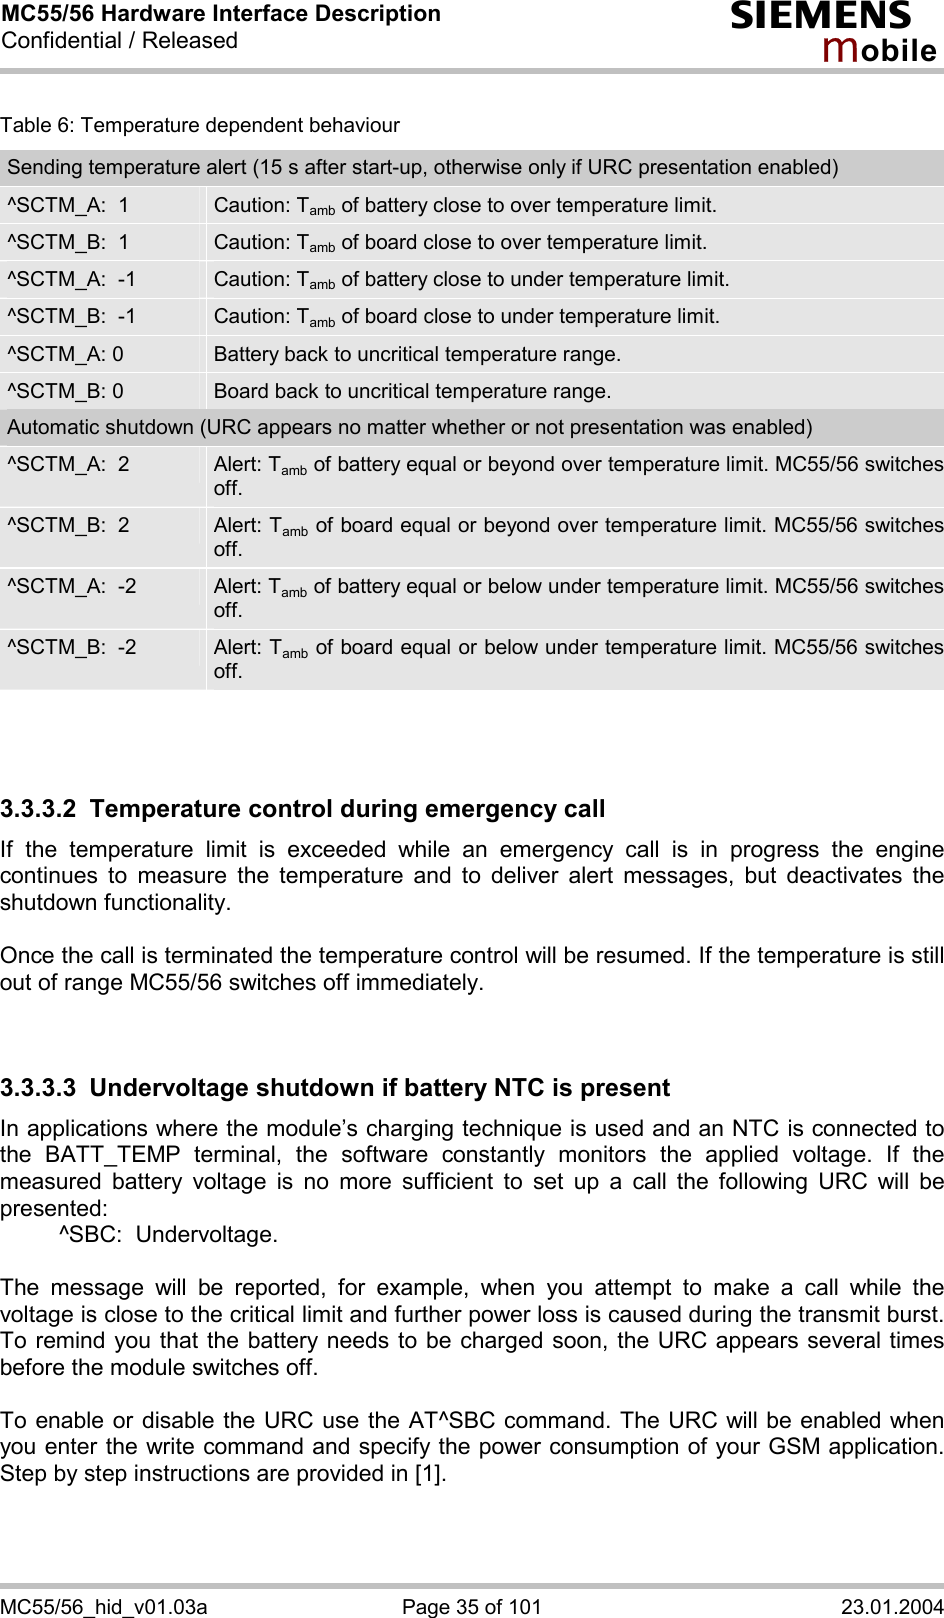 MC55/56 Hardware Interface Description Confidential / Released s mo b i l e MC55/56_hid_v01.03a  Page 35 of 101  23.01.2004 Table 6: Temperature dependent behaviour Sending temperature alert (15 s after start-up, otherwise only if URC presentation enabled) ^SCTM_A:  1  Caution: Tamb of battery close to over temperature limit. ^SCTM_B:  1  Caution: Tamb of board close to over temperature limit. ^SCTM_A:  -1  Caution: Tamb of battery close to under temperature limit. ^SCTM_B:  -1  Caution: Tamb of board close to under temperature limit. ^SCTM_A: 0  Battery back to uncritical temperature range. ^SCTM_B: 0  Board back to uncritical temperature range. Automatic shutdown (URC appears no matter whether or not presentation was enabled) ^SCTM_A:  2  Alert: Tamb of battery equal or beyond over temperature limit. MC55/56 switches off. ^SCTM_B:  2  Alert: Tamb of board equal or beyond over temperature limit. MC55/56 switches off. ^SCTM_A:  -2  Alert: Tamb of battery equal or below under temperature limit. MC55/56 switches off. ^SCTM_B:  -2  Alert: Tamb of board equal or below under temperature limit. MC55/56 switches off.    3.3.3.2  Temperature control during emergency call If the temperature limit is exceeded while an emergency call is in progress the engine continues to measure the temperature and to deliver alert messages, but deactivates the shutdown functionality.   Once the call is terminated the temperature control will be resumed. If the temperature is still out of range MC55/56 switches off immediately.   3.3.3.3  Undervoltage shutdown if battery NTC is present In applications where the module’s charging technique is used and an NTC is connected to the BATT_TEMP terminal, the software constantly monitors the applied voltage. If the measured battery voltage is no more sufficient to set up a call the following URC will be presented:    ^SBC:  Undervoltage.  The message will be reported, for example, when you attempt to make a call while the voltage is close to the critical limit and further power loss is caused during the transmit burst. To remind you that the battery needs to be charged soon, the URC appears several times before the module switches off.   To enable or disable the URC use the AT^SBC command. The URC will be enabled when you enter the write command and specify the power consumption of your GSM application. Step by step instructions are provided in [1].   